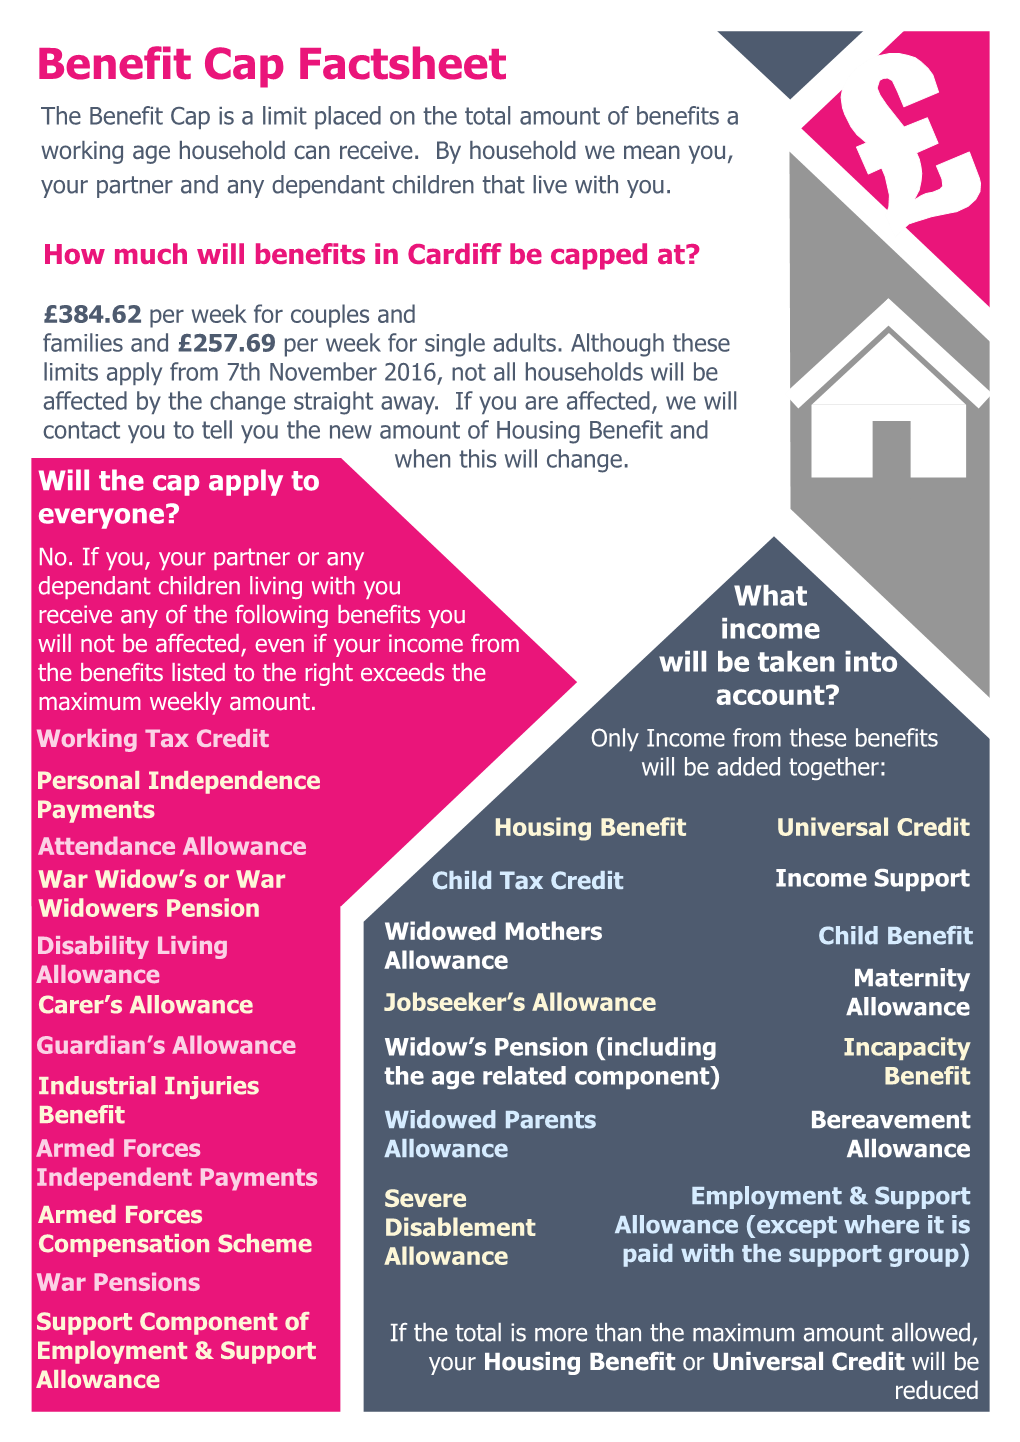 Benefit Cap Factsheet the Benefit Cap Is a Limit Placed on the Total Amount of Benefits a Working Age Household Can Receive